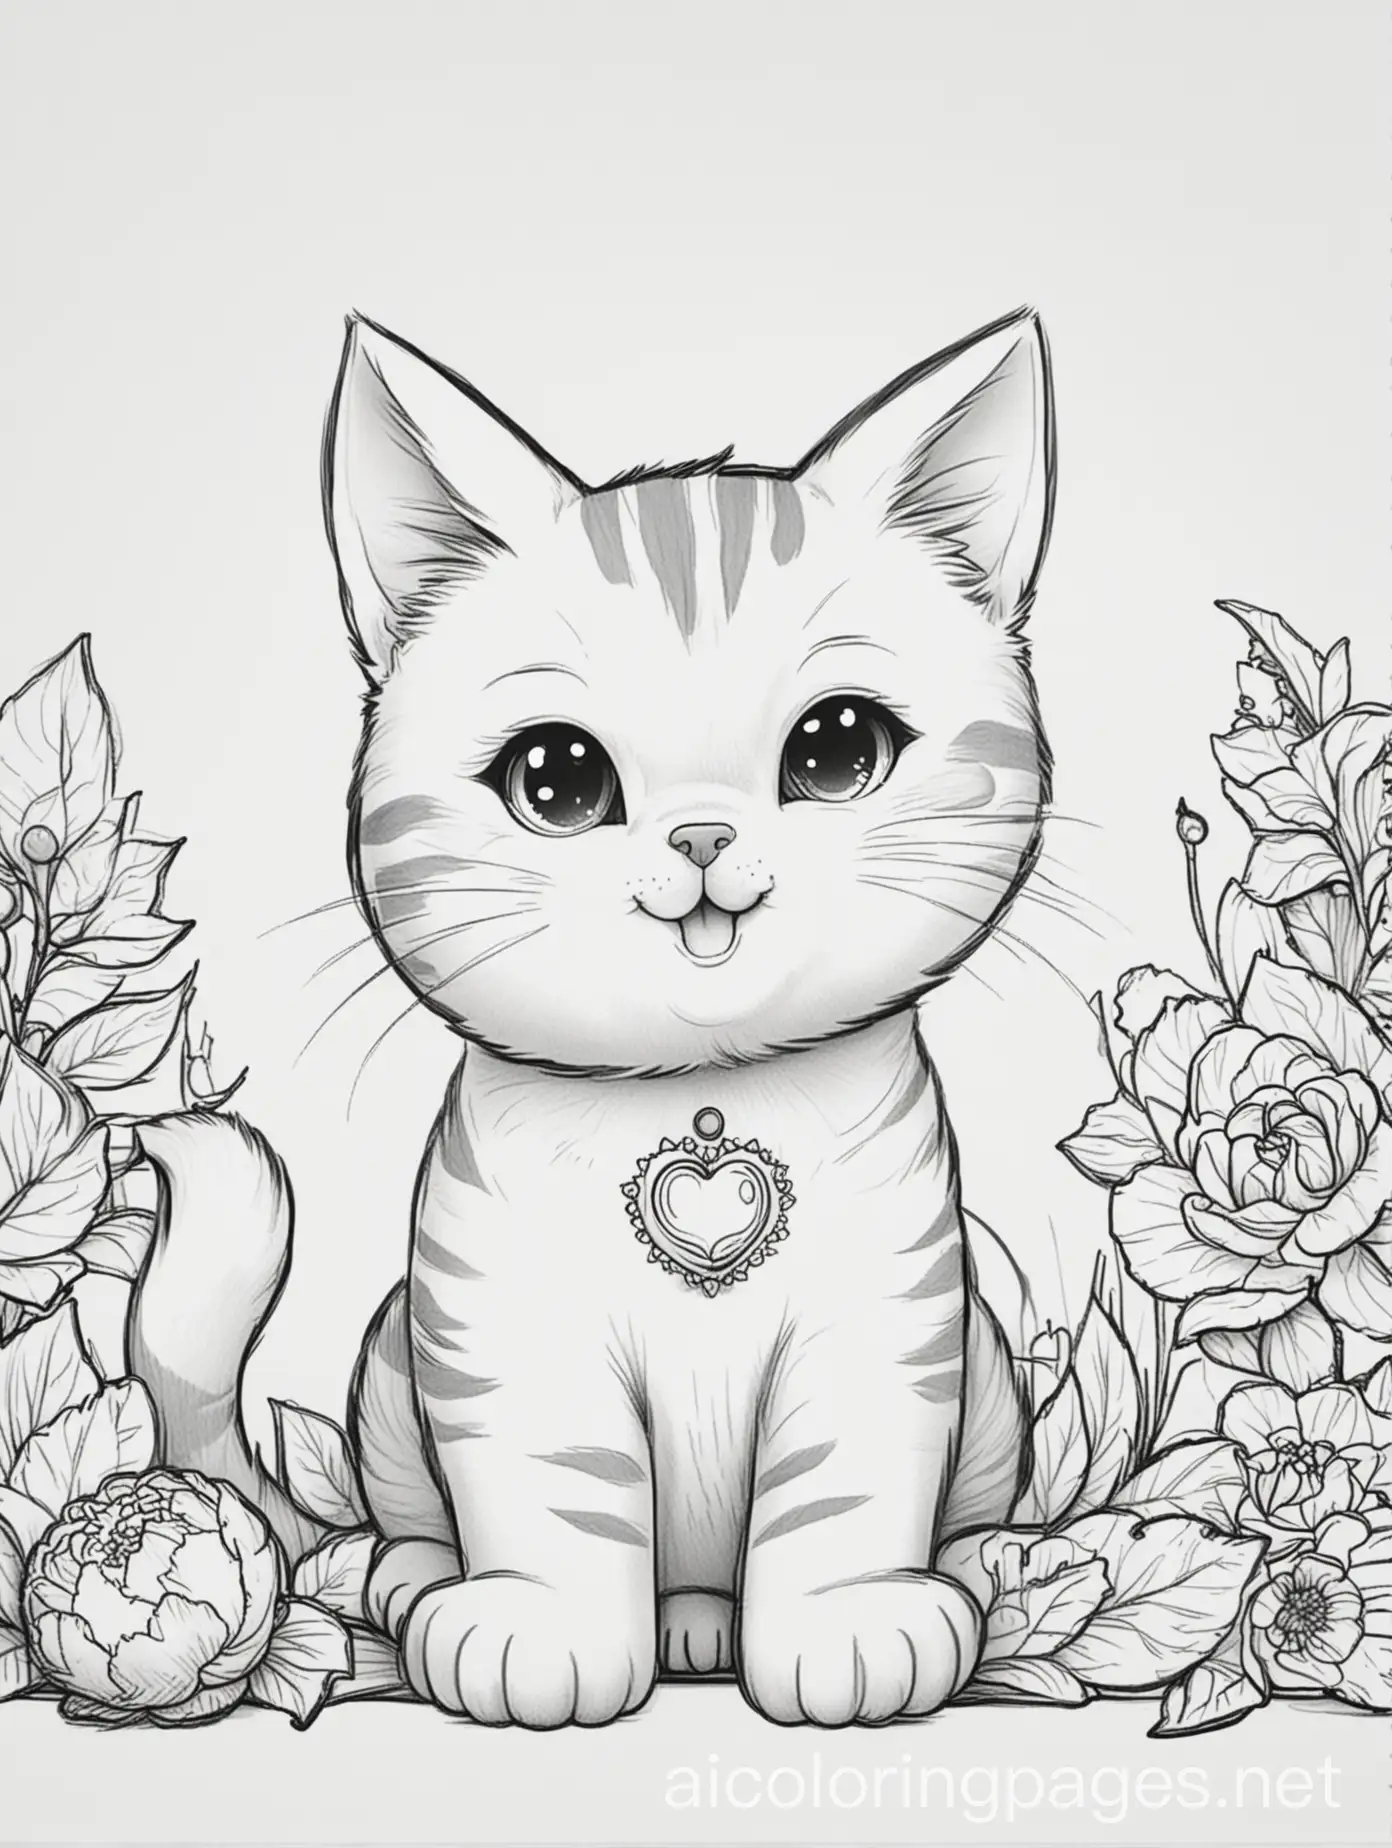 Cheerful-Cat-Coloring-Page-with-Playful-Toys-on-White-Background